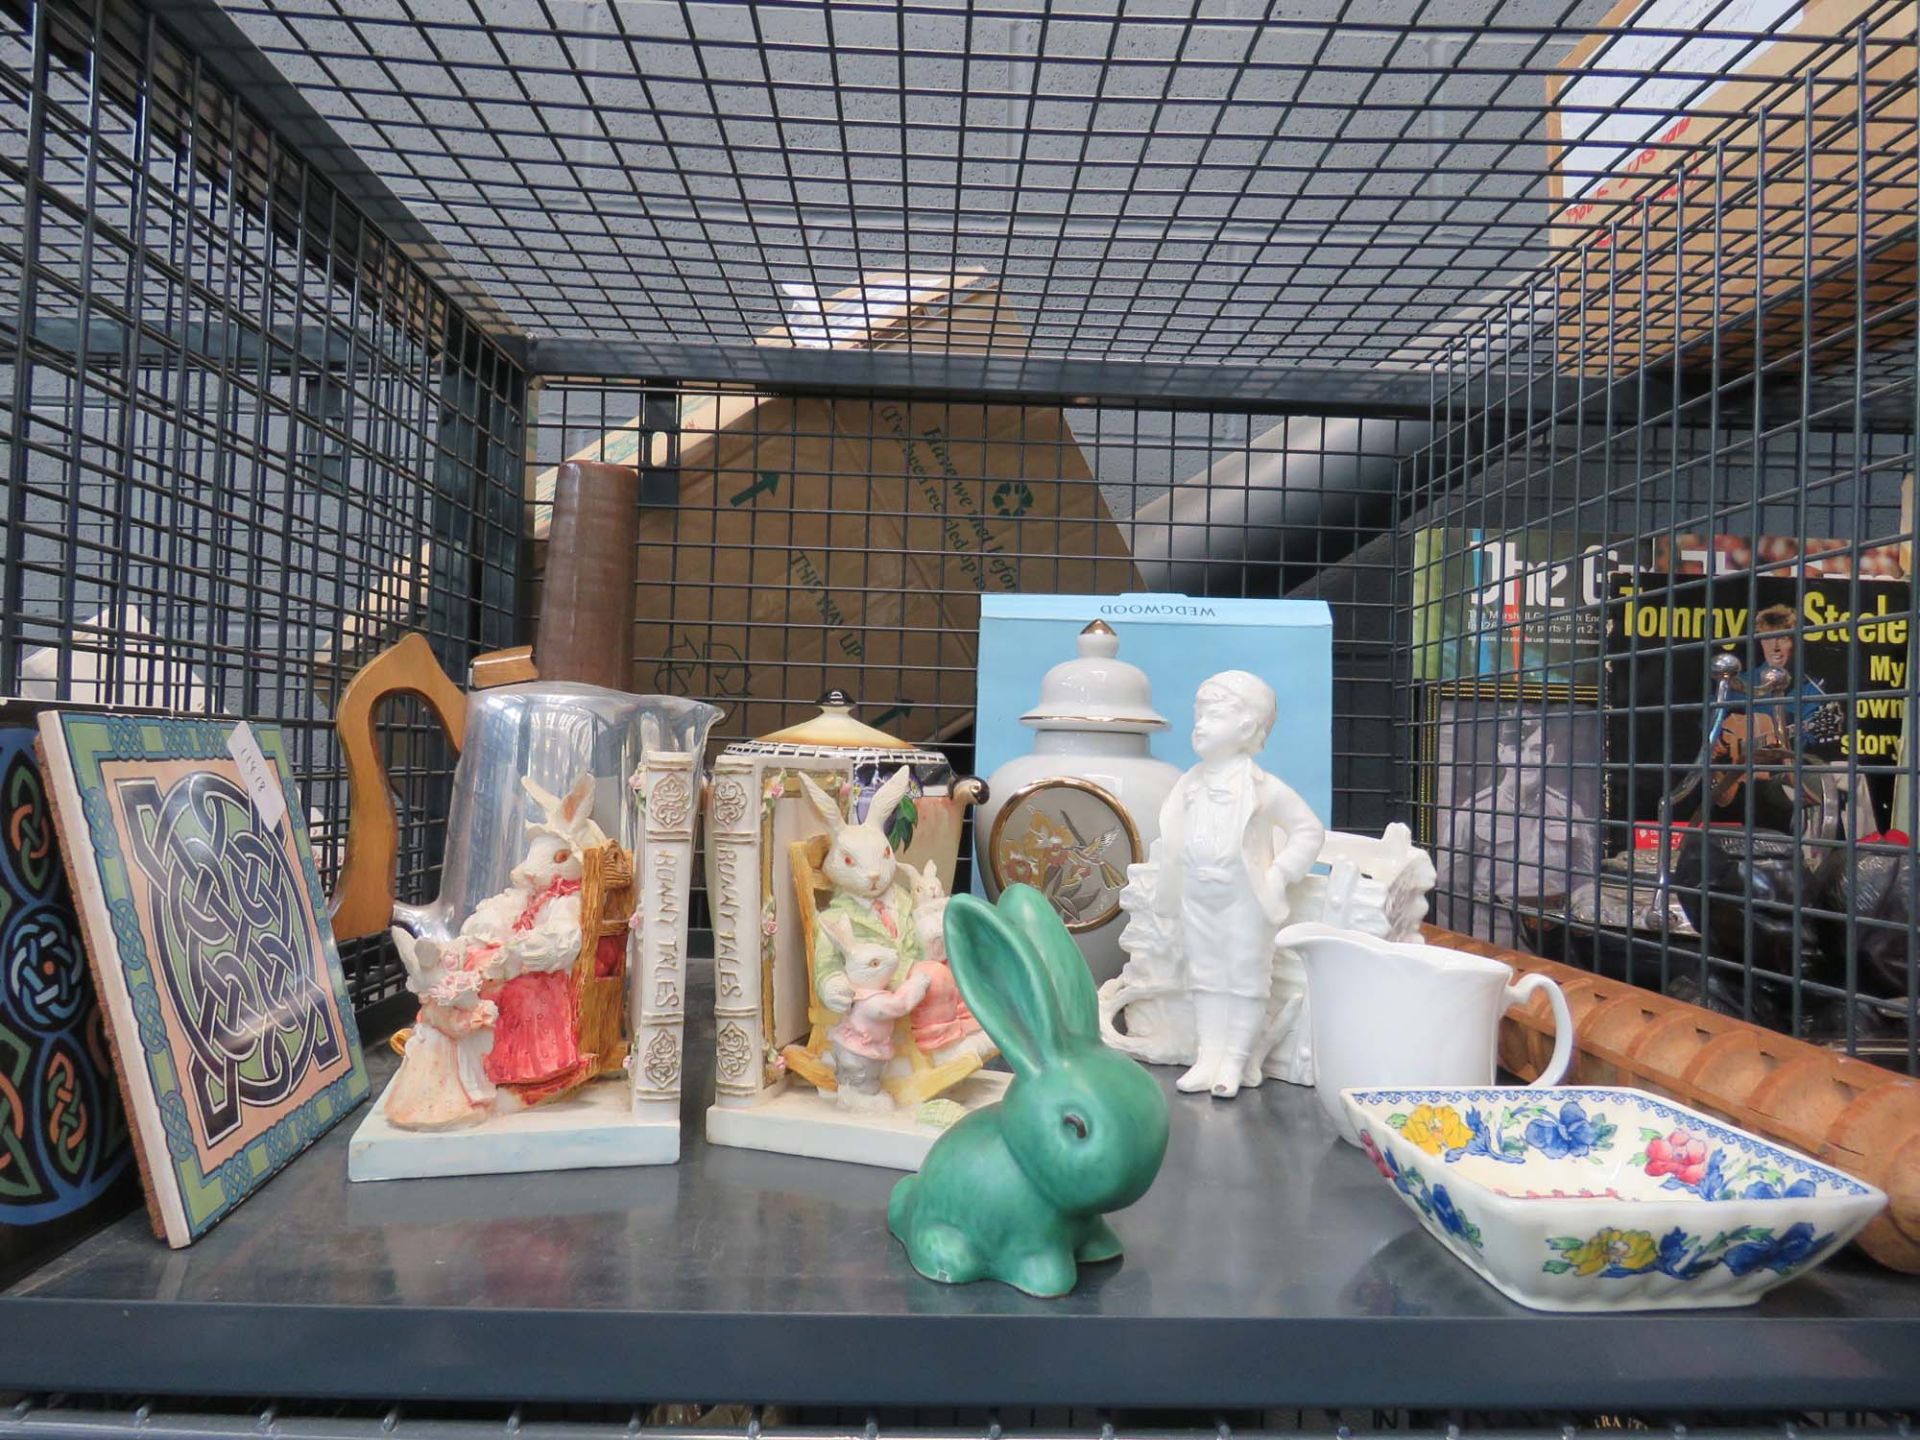 Cage containing bunny rabbit book ends, tiles, Silvac style rabbit, rolling pin plus a Picquotware